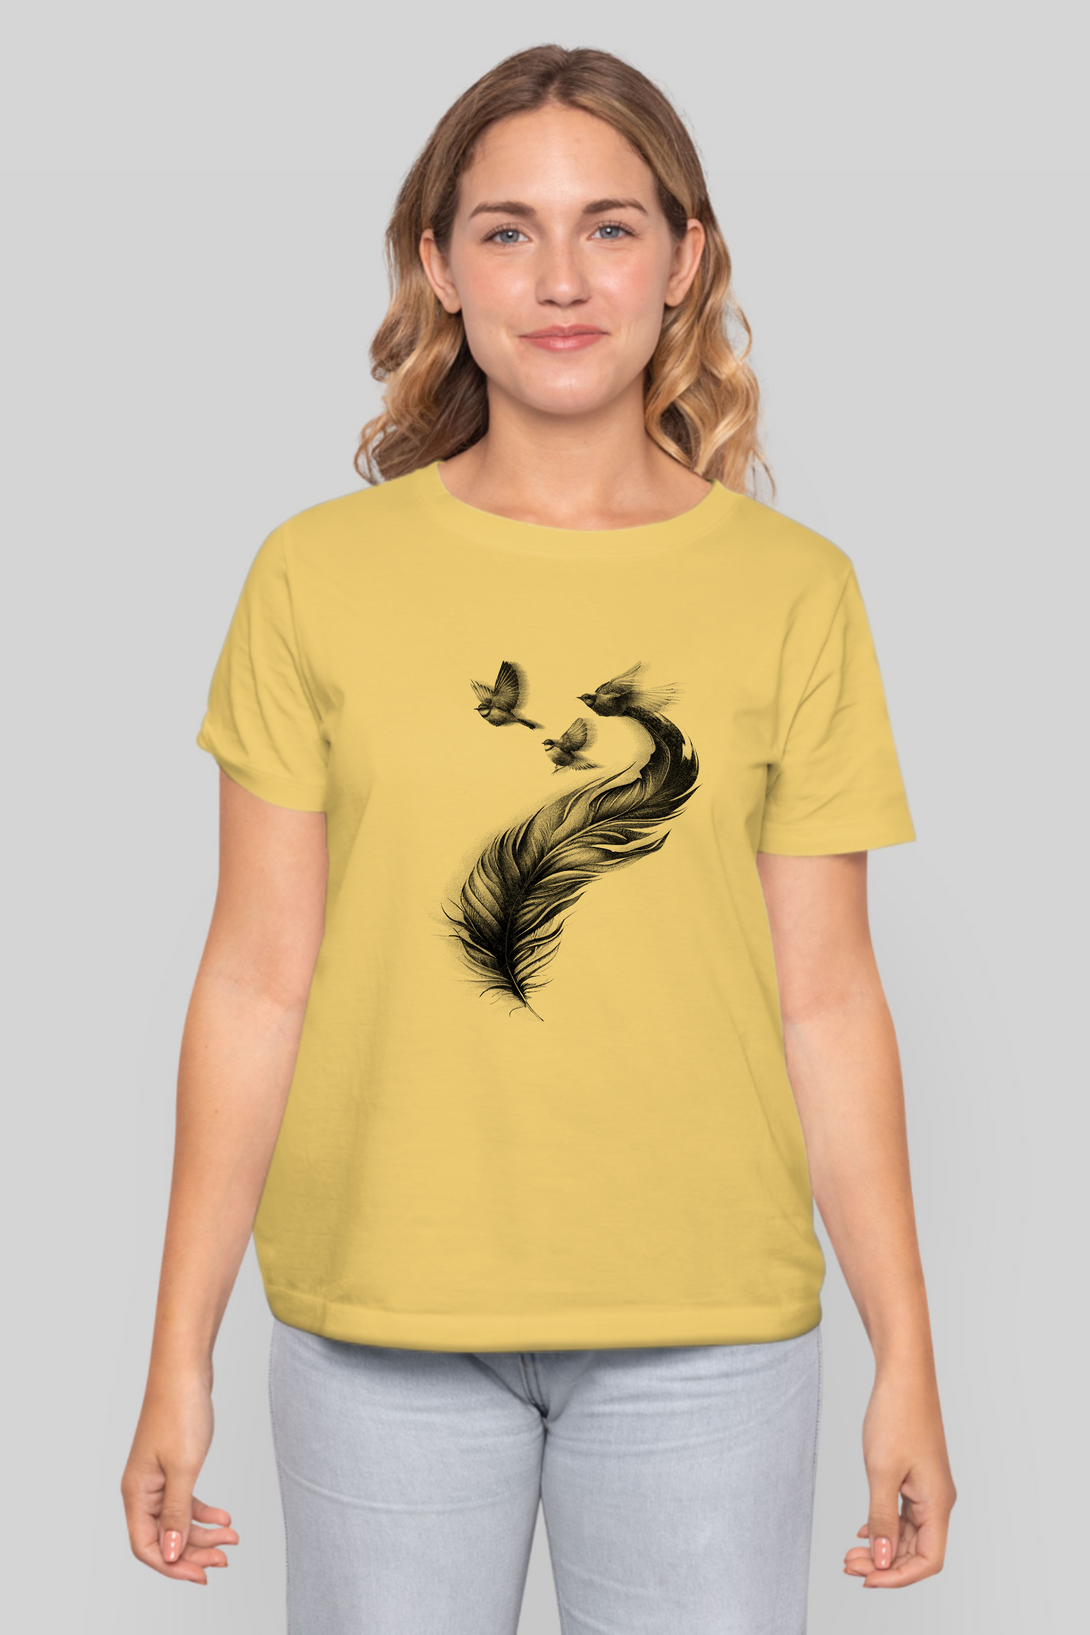 Feather With Birds Printed T-Shirt For Women - WowWaves - 7